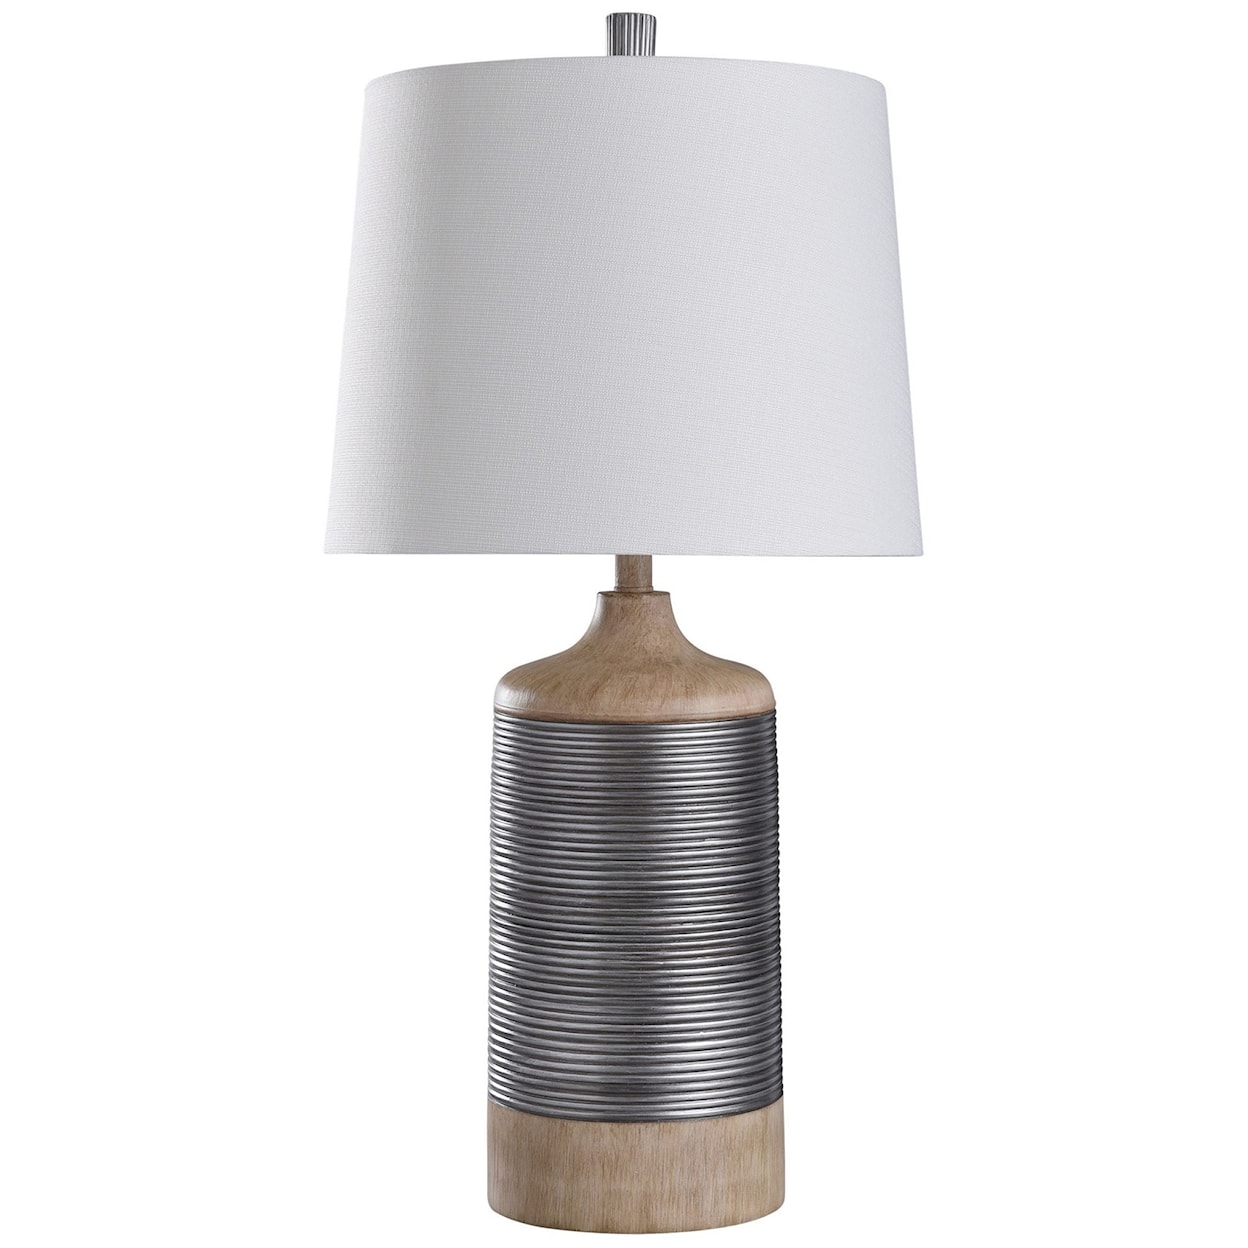 StyleCraft Lamps Haver Hill Table Lamp